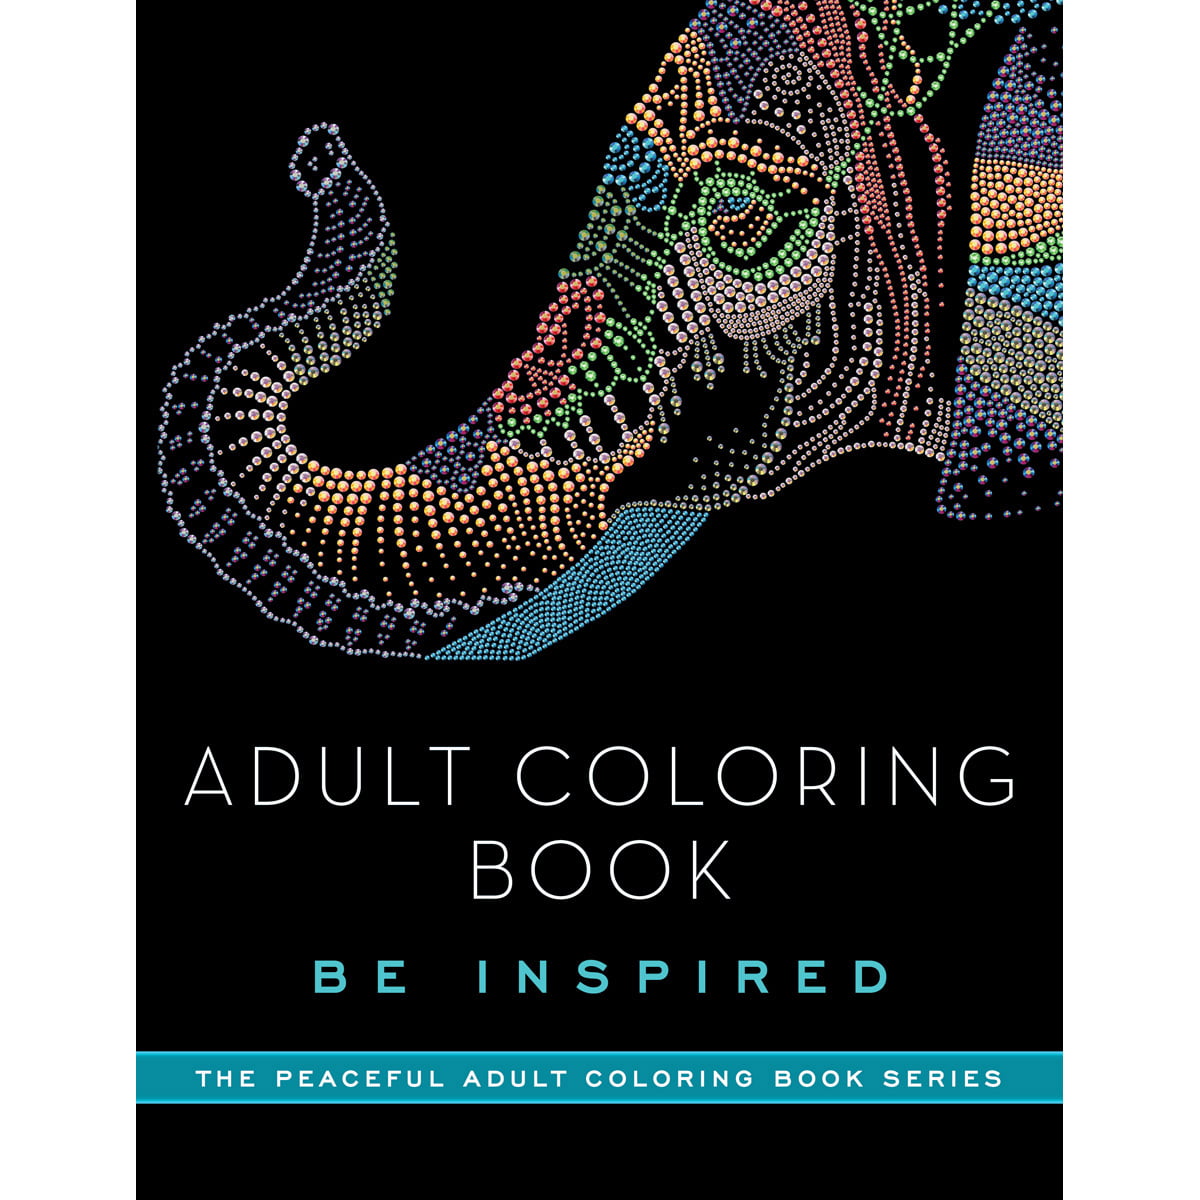 Adult Coloring Books: Adult Coloring Book: 9781517616601